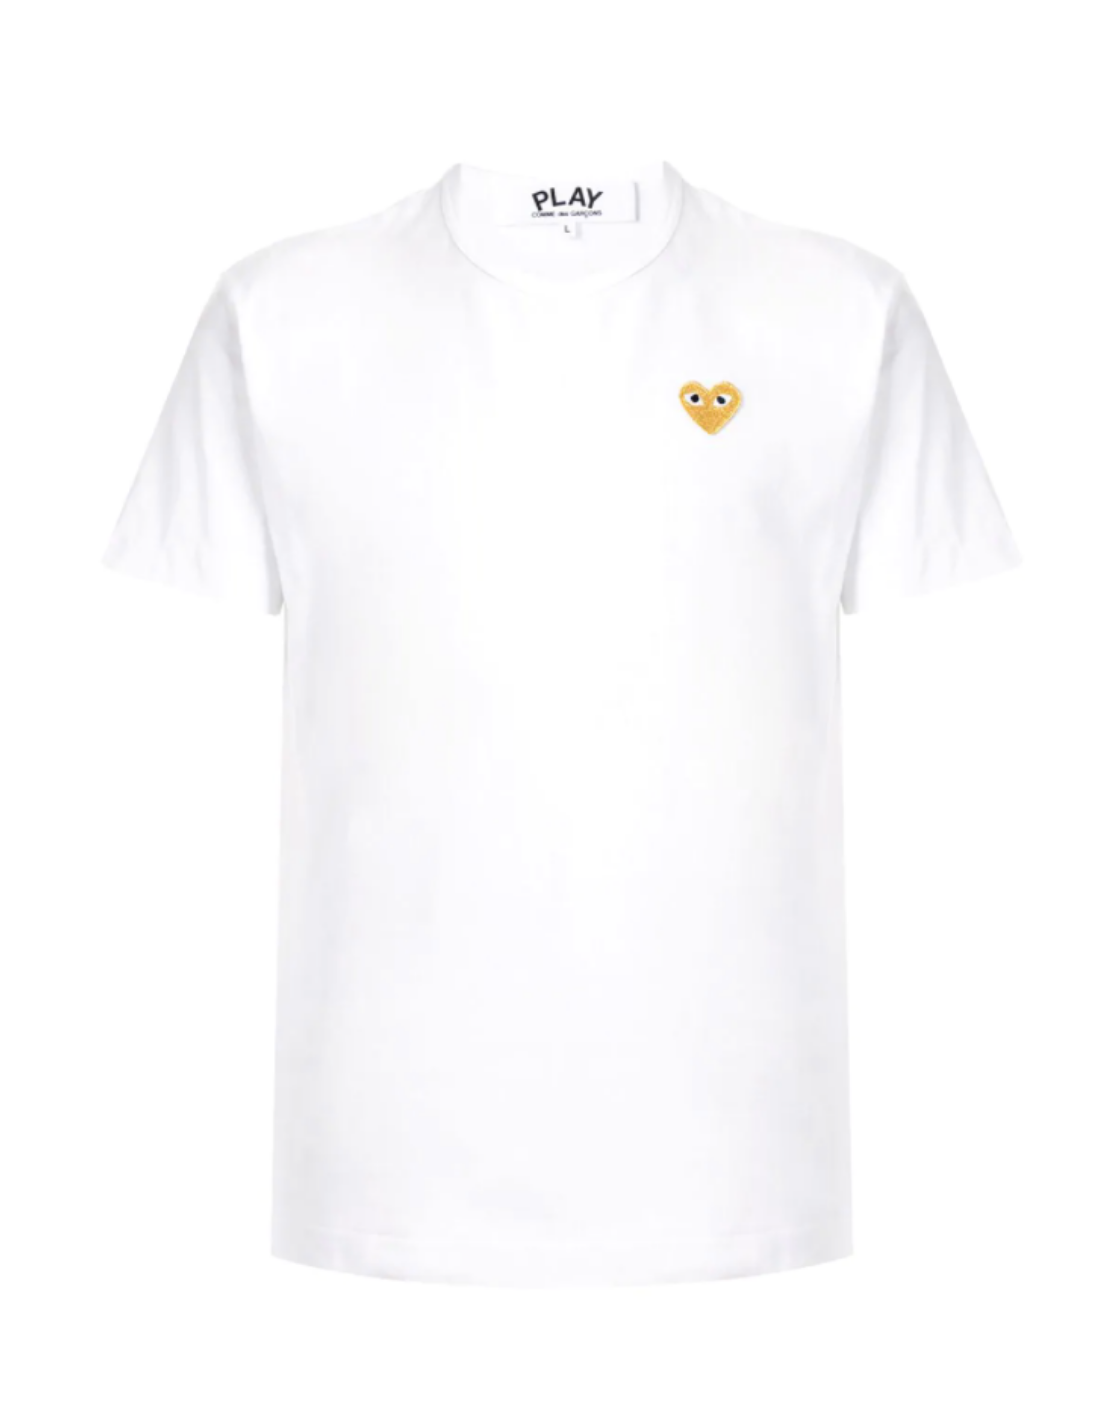 Isse Pidgin Kvinde COMME DES GARCONS PLAY white tee with gold heart unisex.